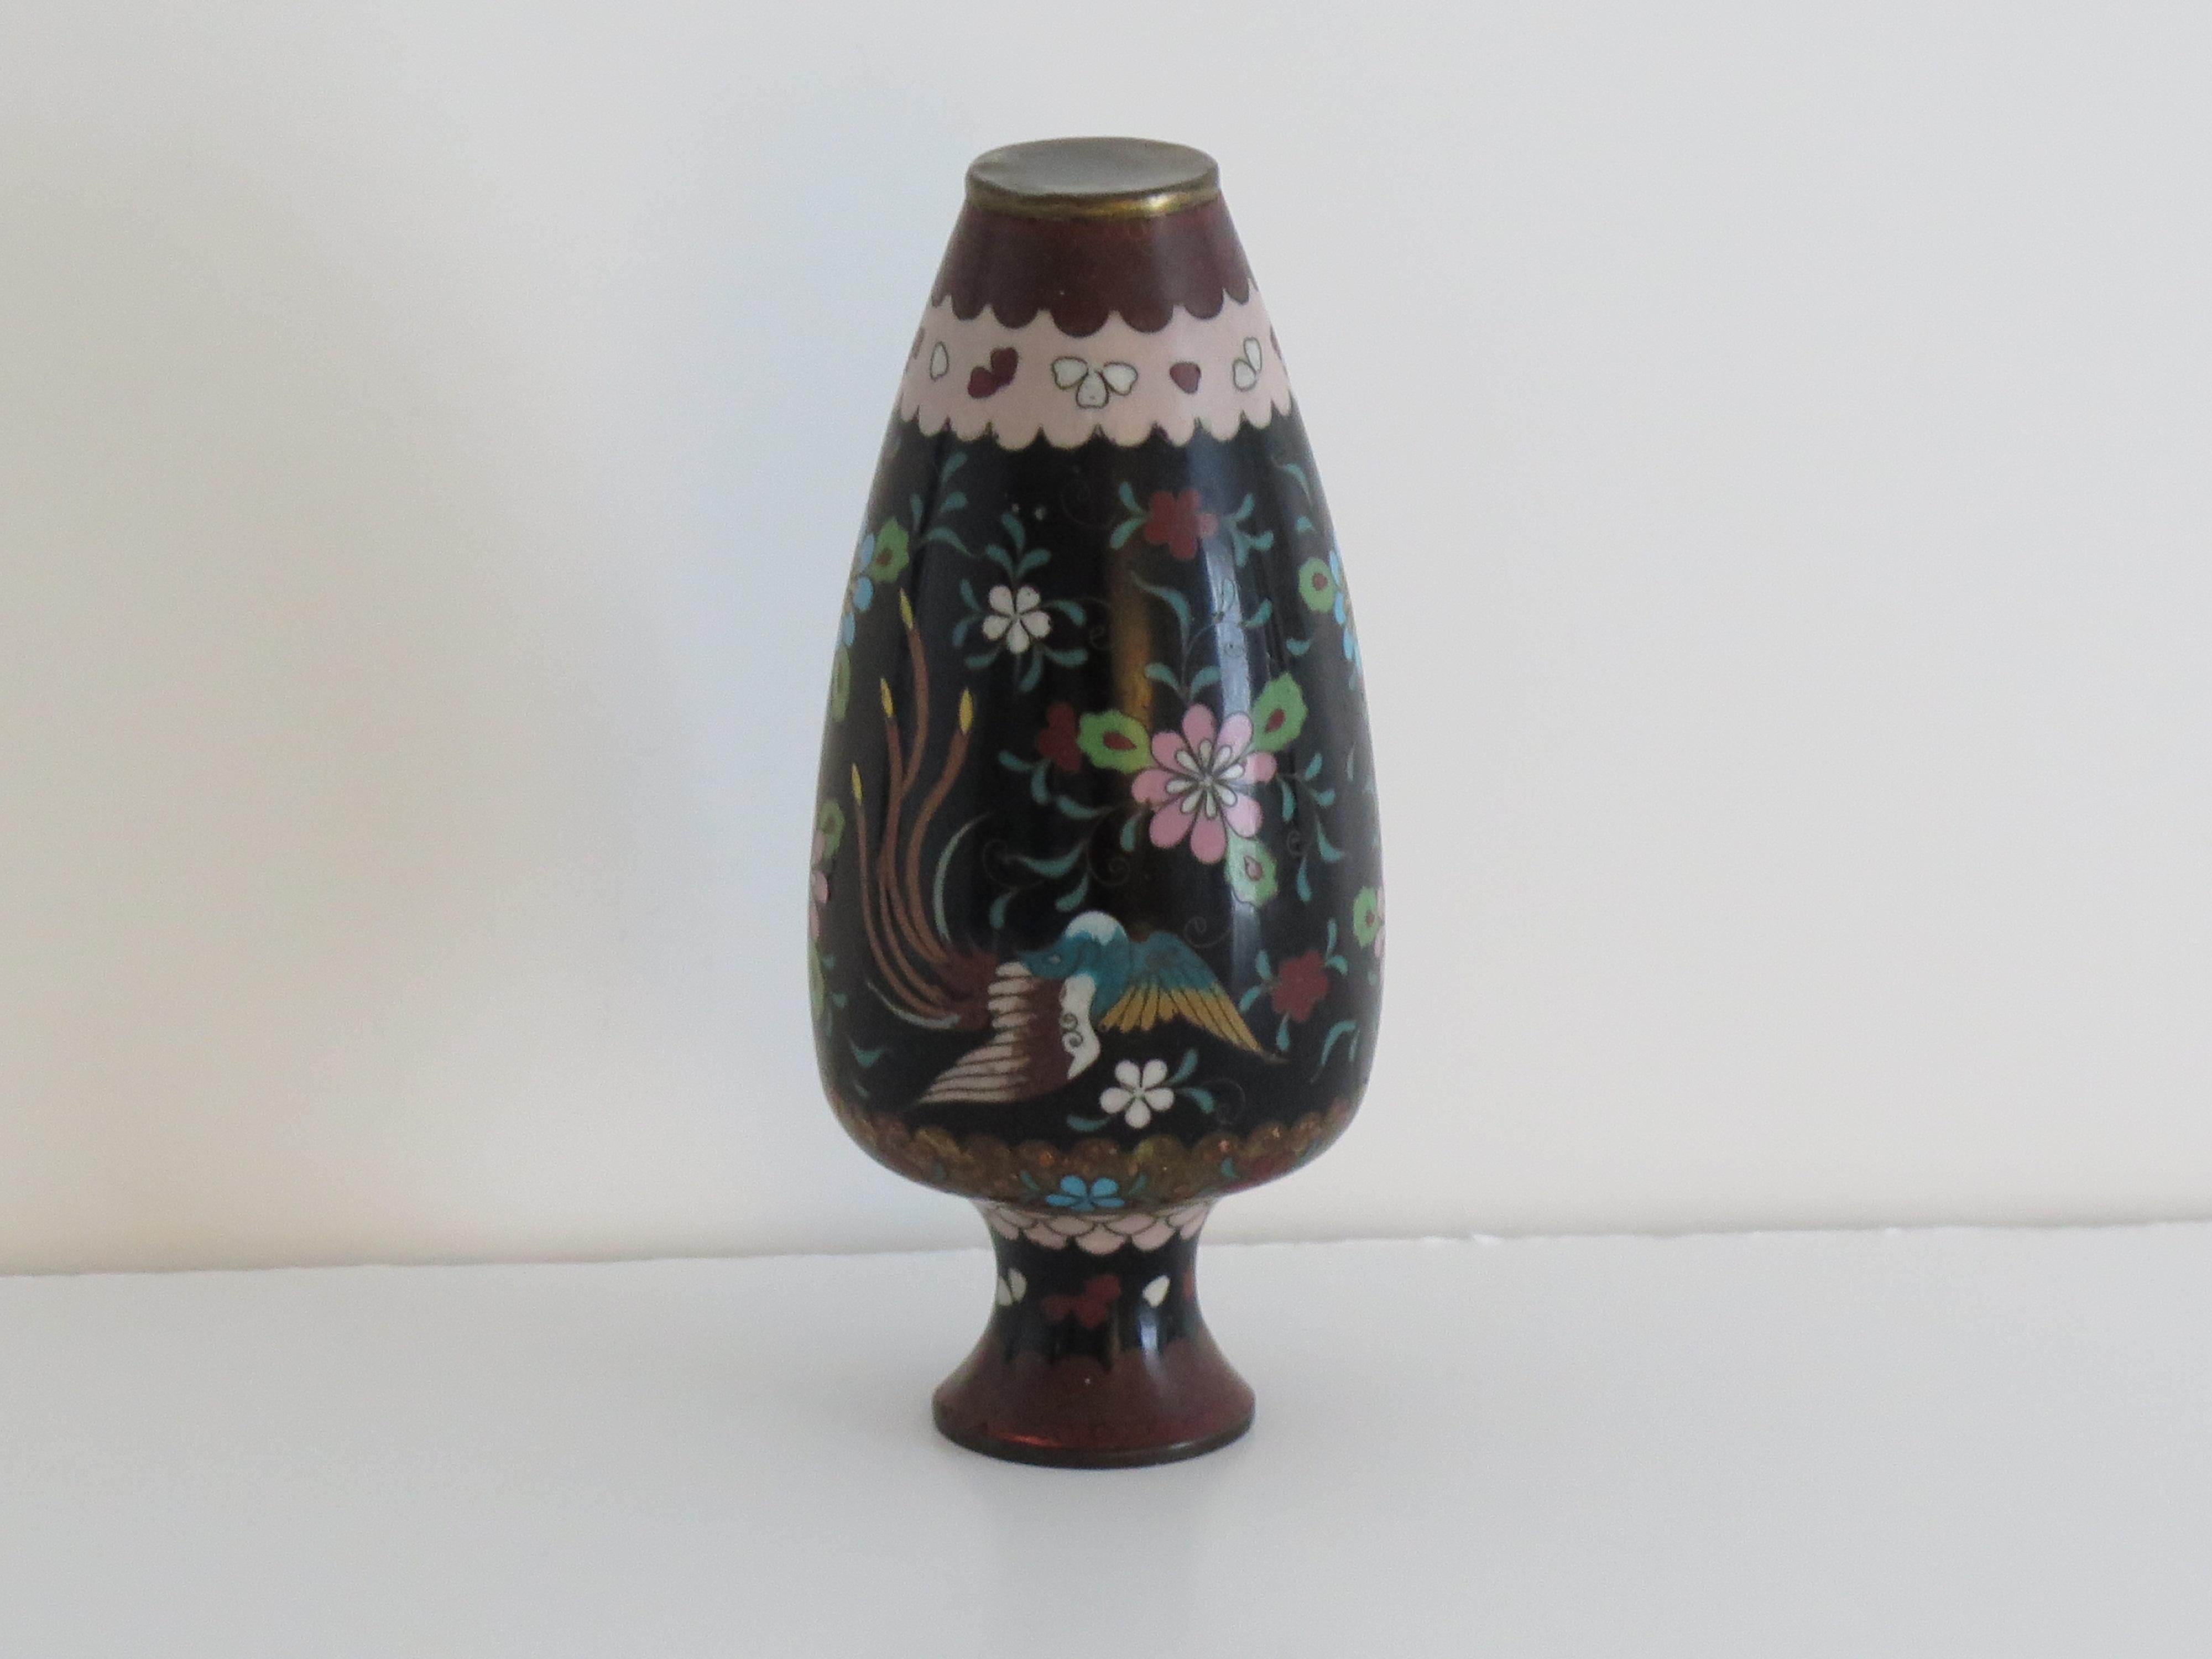 This is a very decorative Chinese cloisonné vase dating to the mid 19th Century, Qing period. 

The vase has a good baluster shape. It has been well made of a bronze alloy with rich enamels of many different colours, set into a black ground.

The